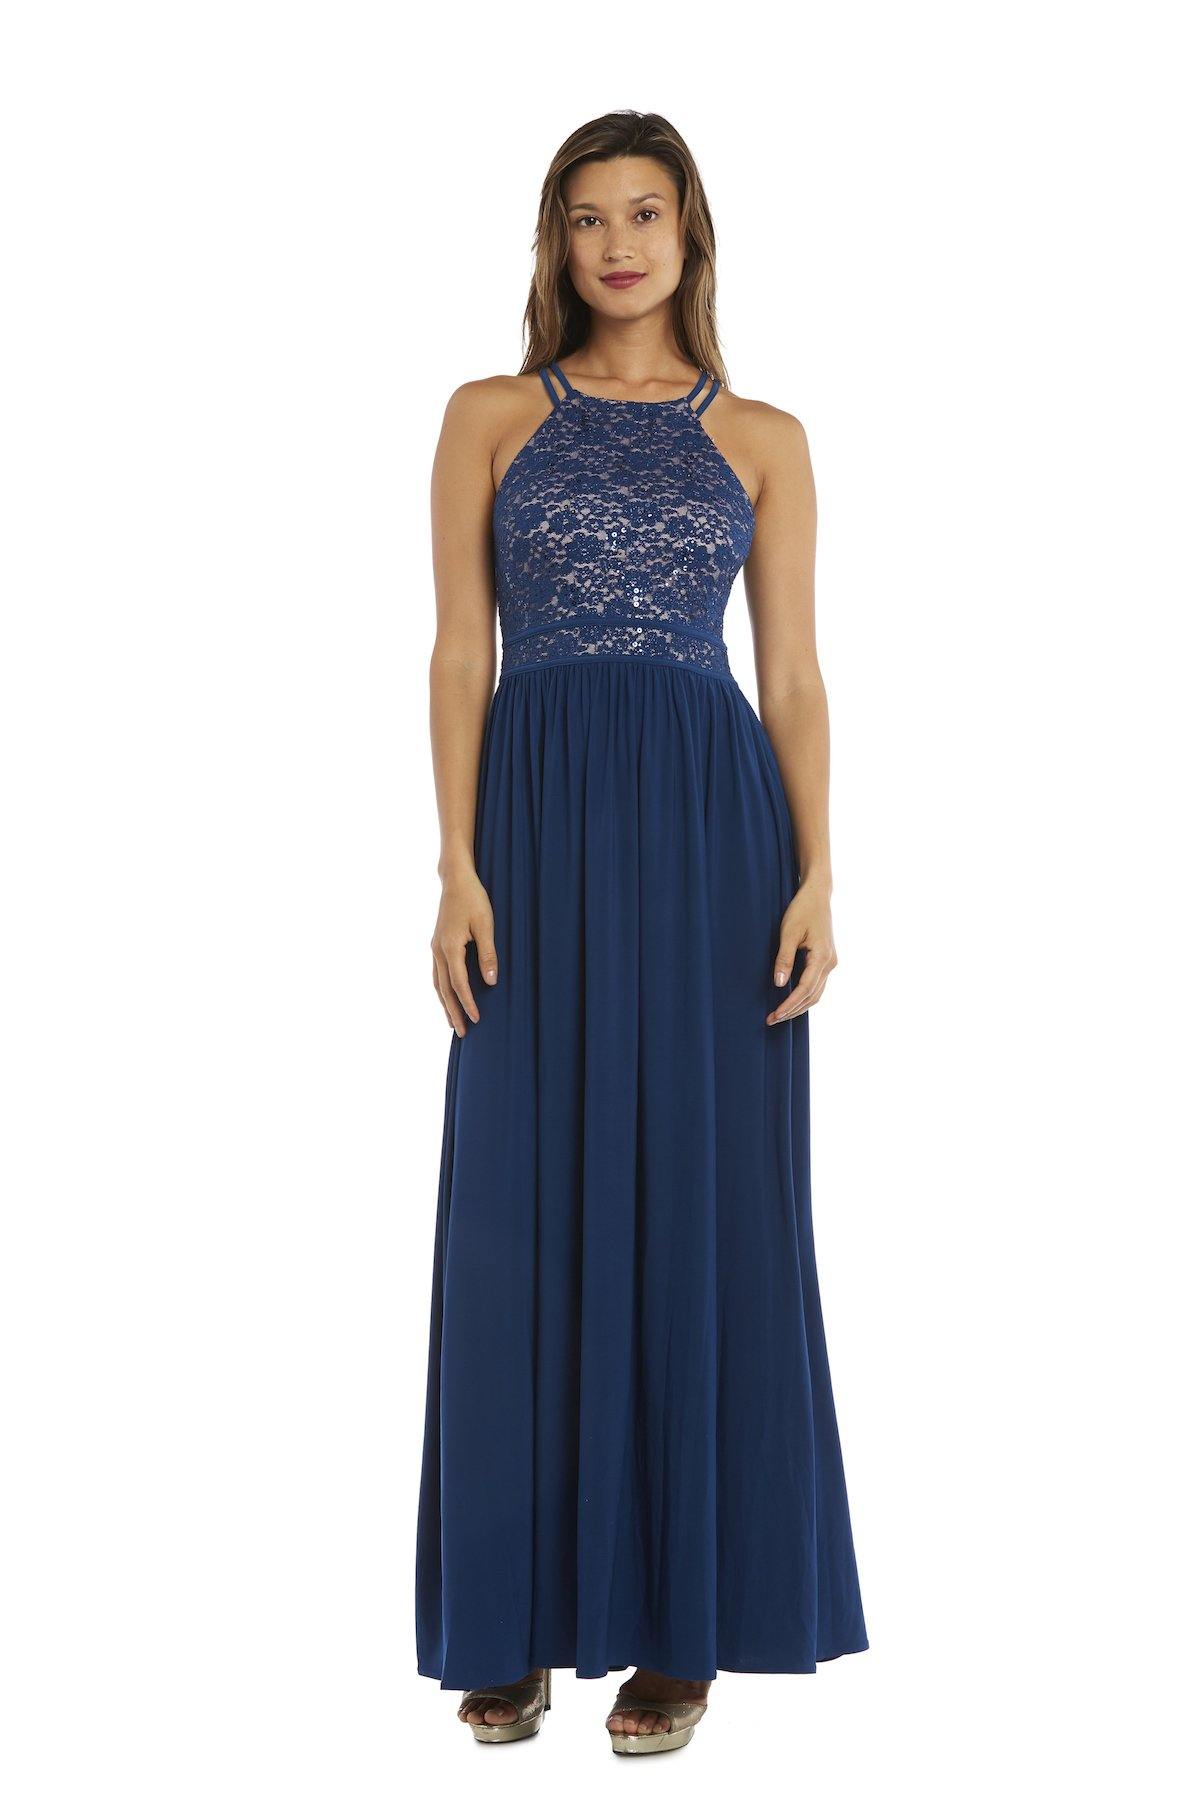 Nightway Long Formal Dress 12530M - The Dress Outlet